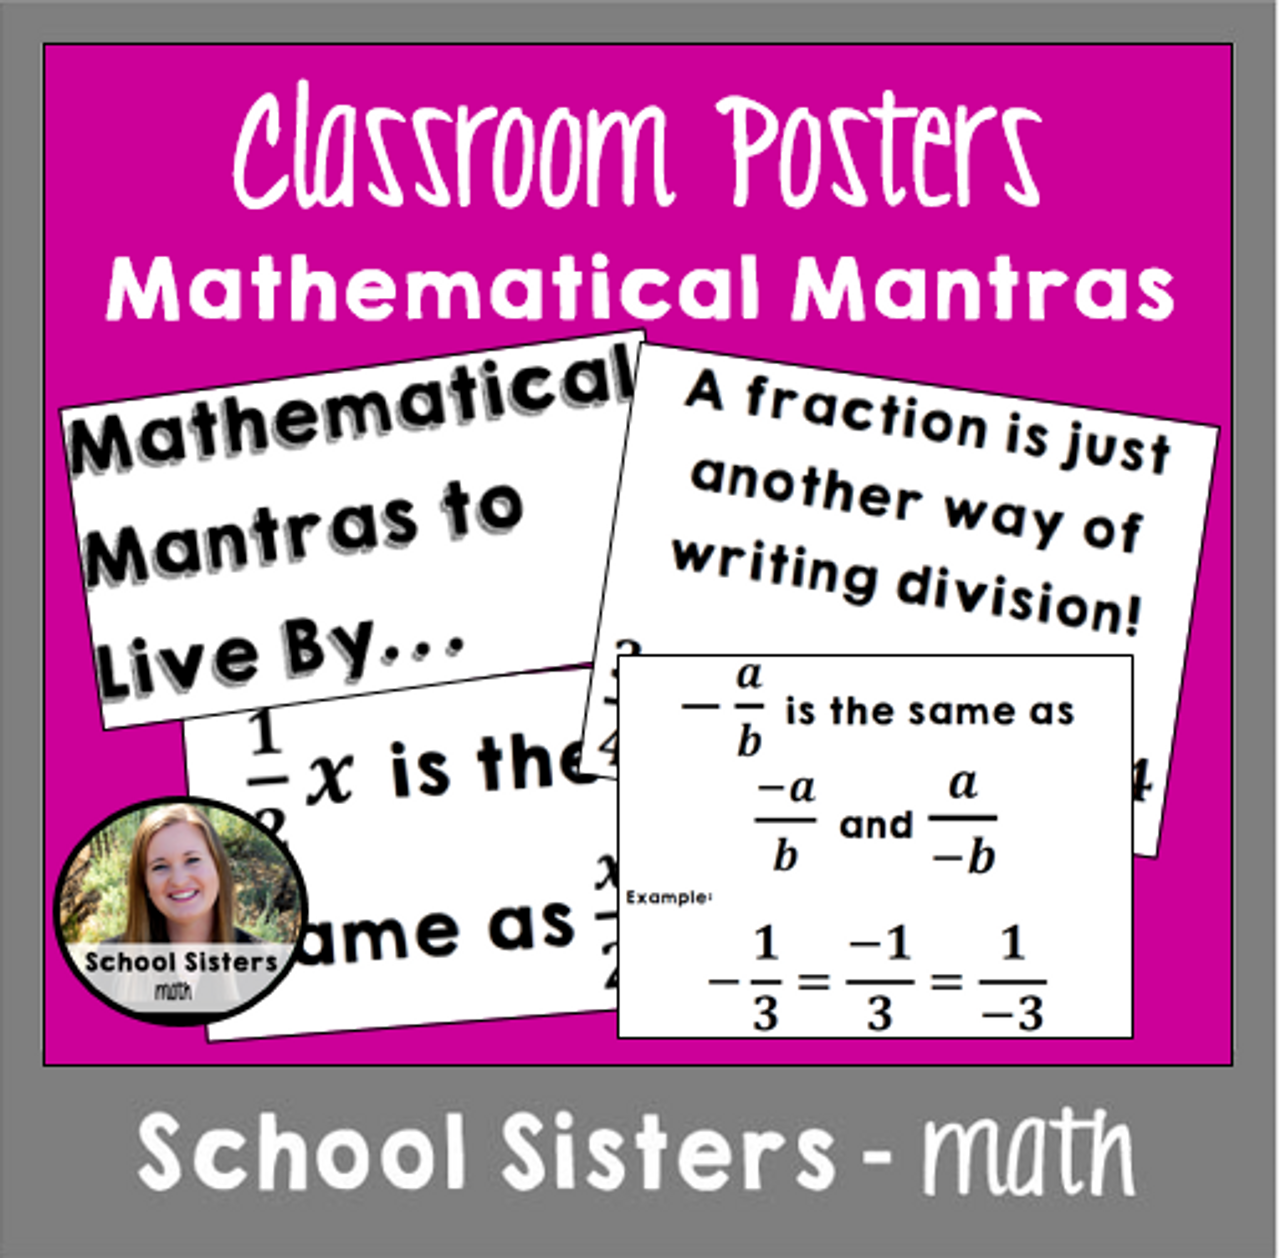 7th Grade Mathematical Mantras Posters